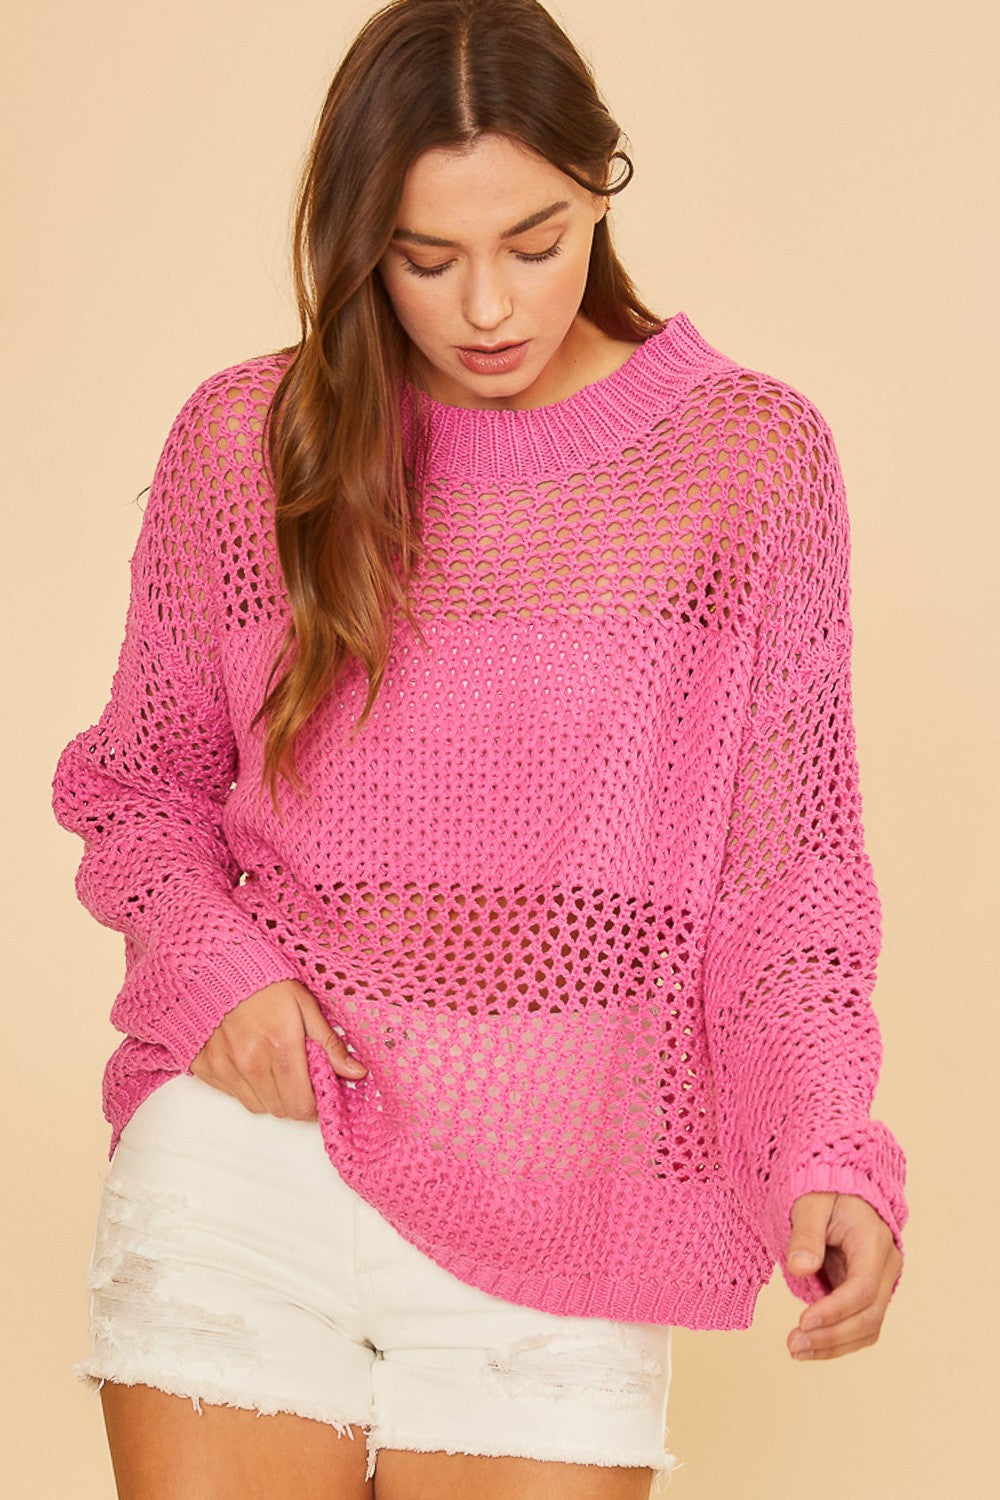 Quincy Fishnet Loose Fit Sweater